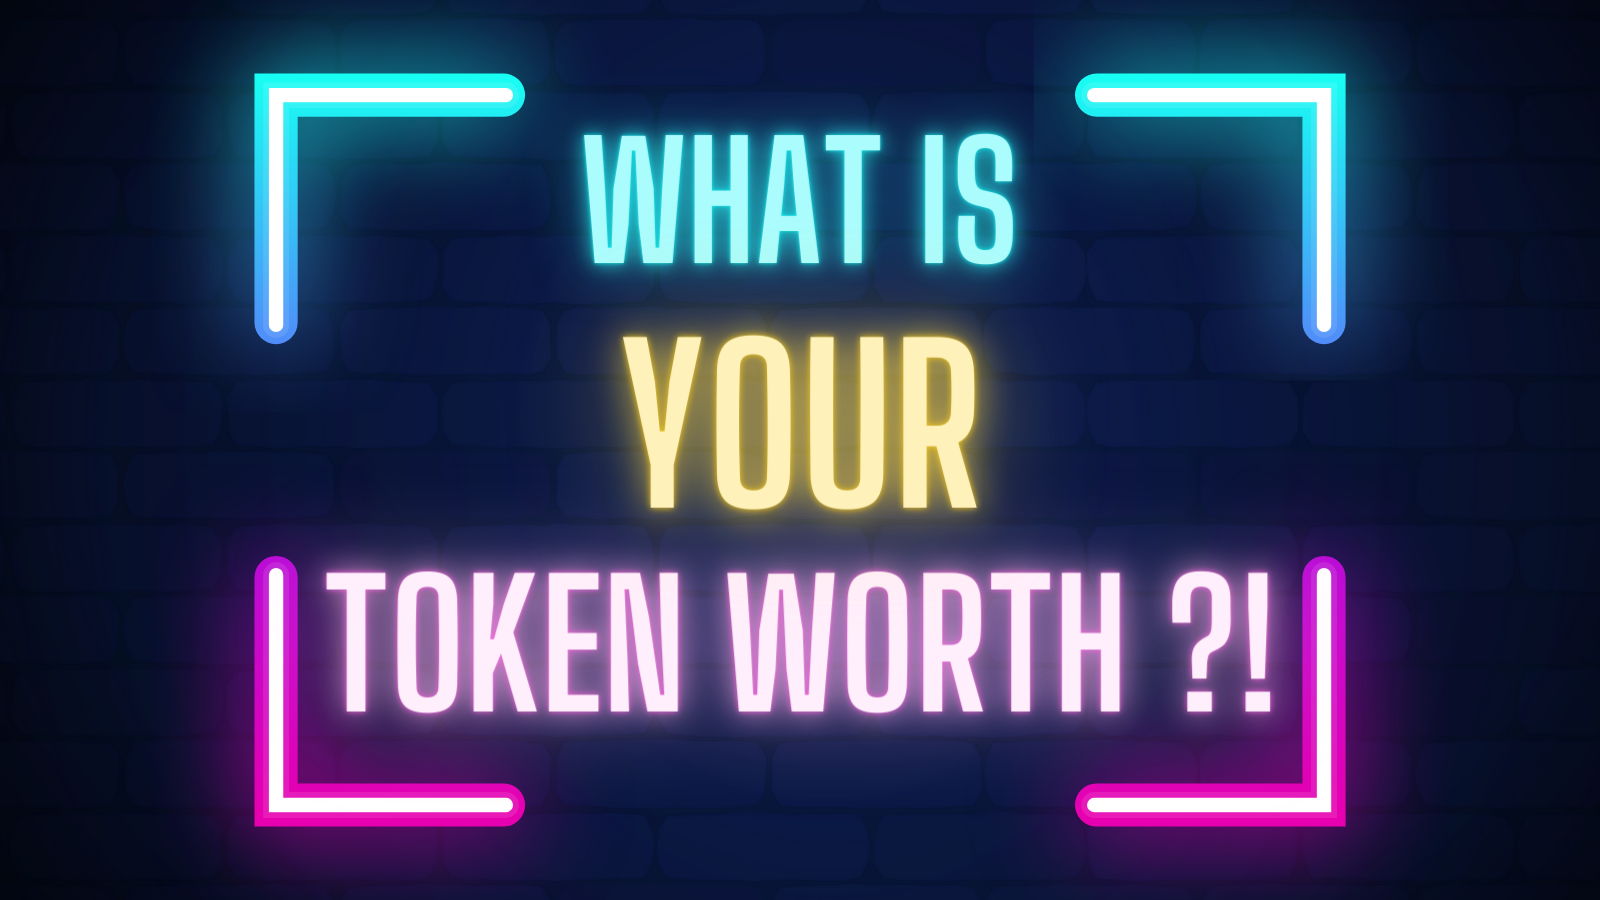 What Is Your Token Worth???